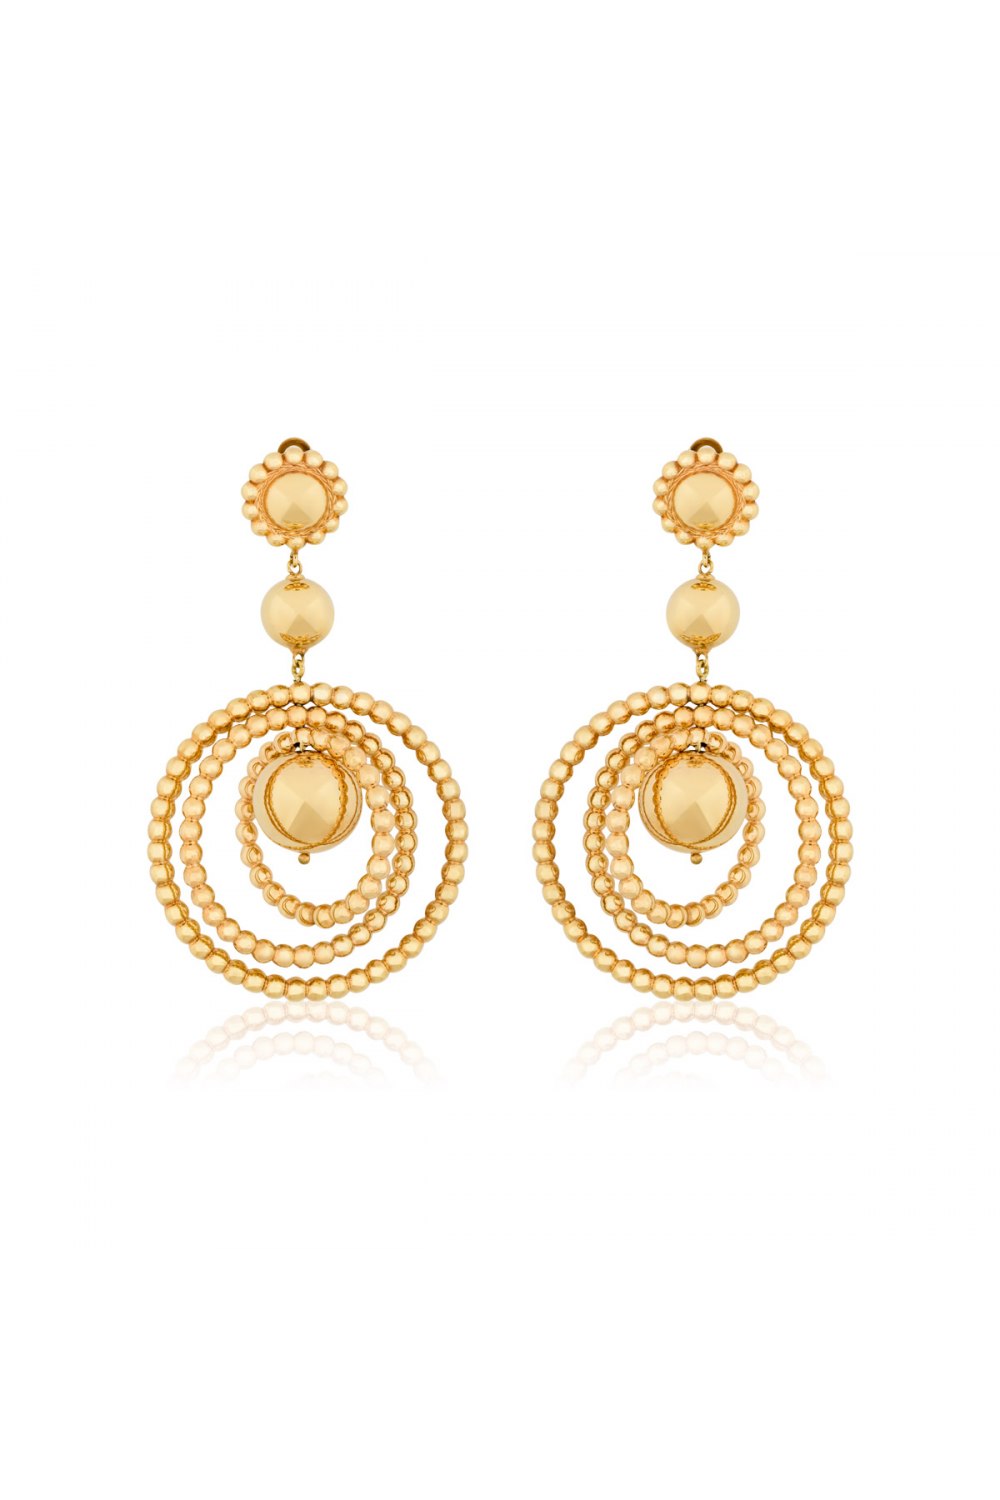 Twisting Rounds Yellow Gold Earrings